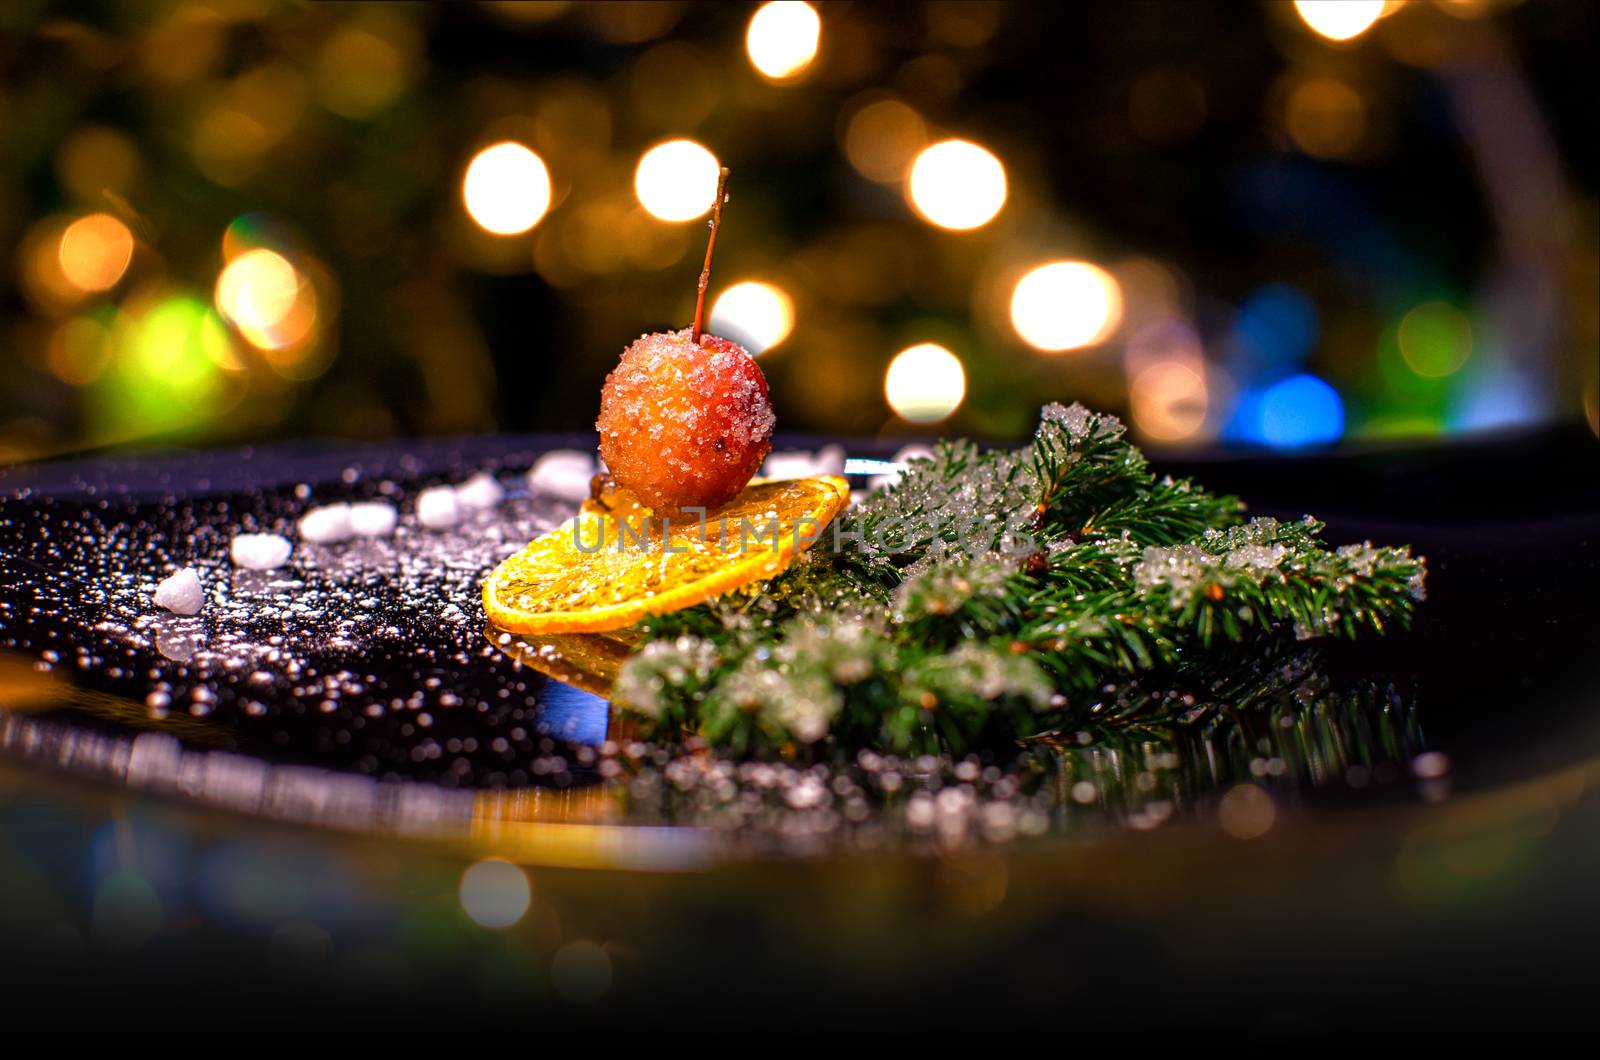 Christmas setting festive decorations with cherry. Creative Christmas composition with cherry and christmas tree. Stock photo